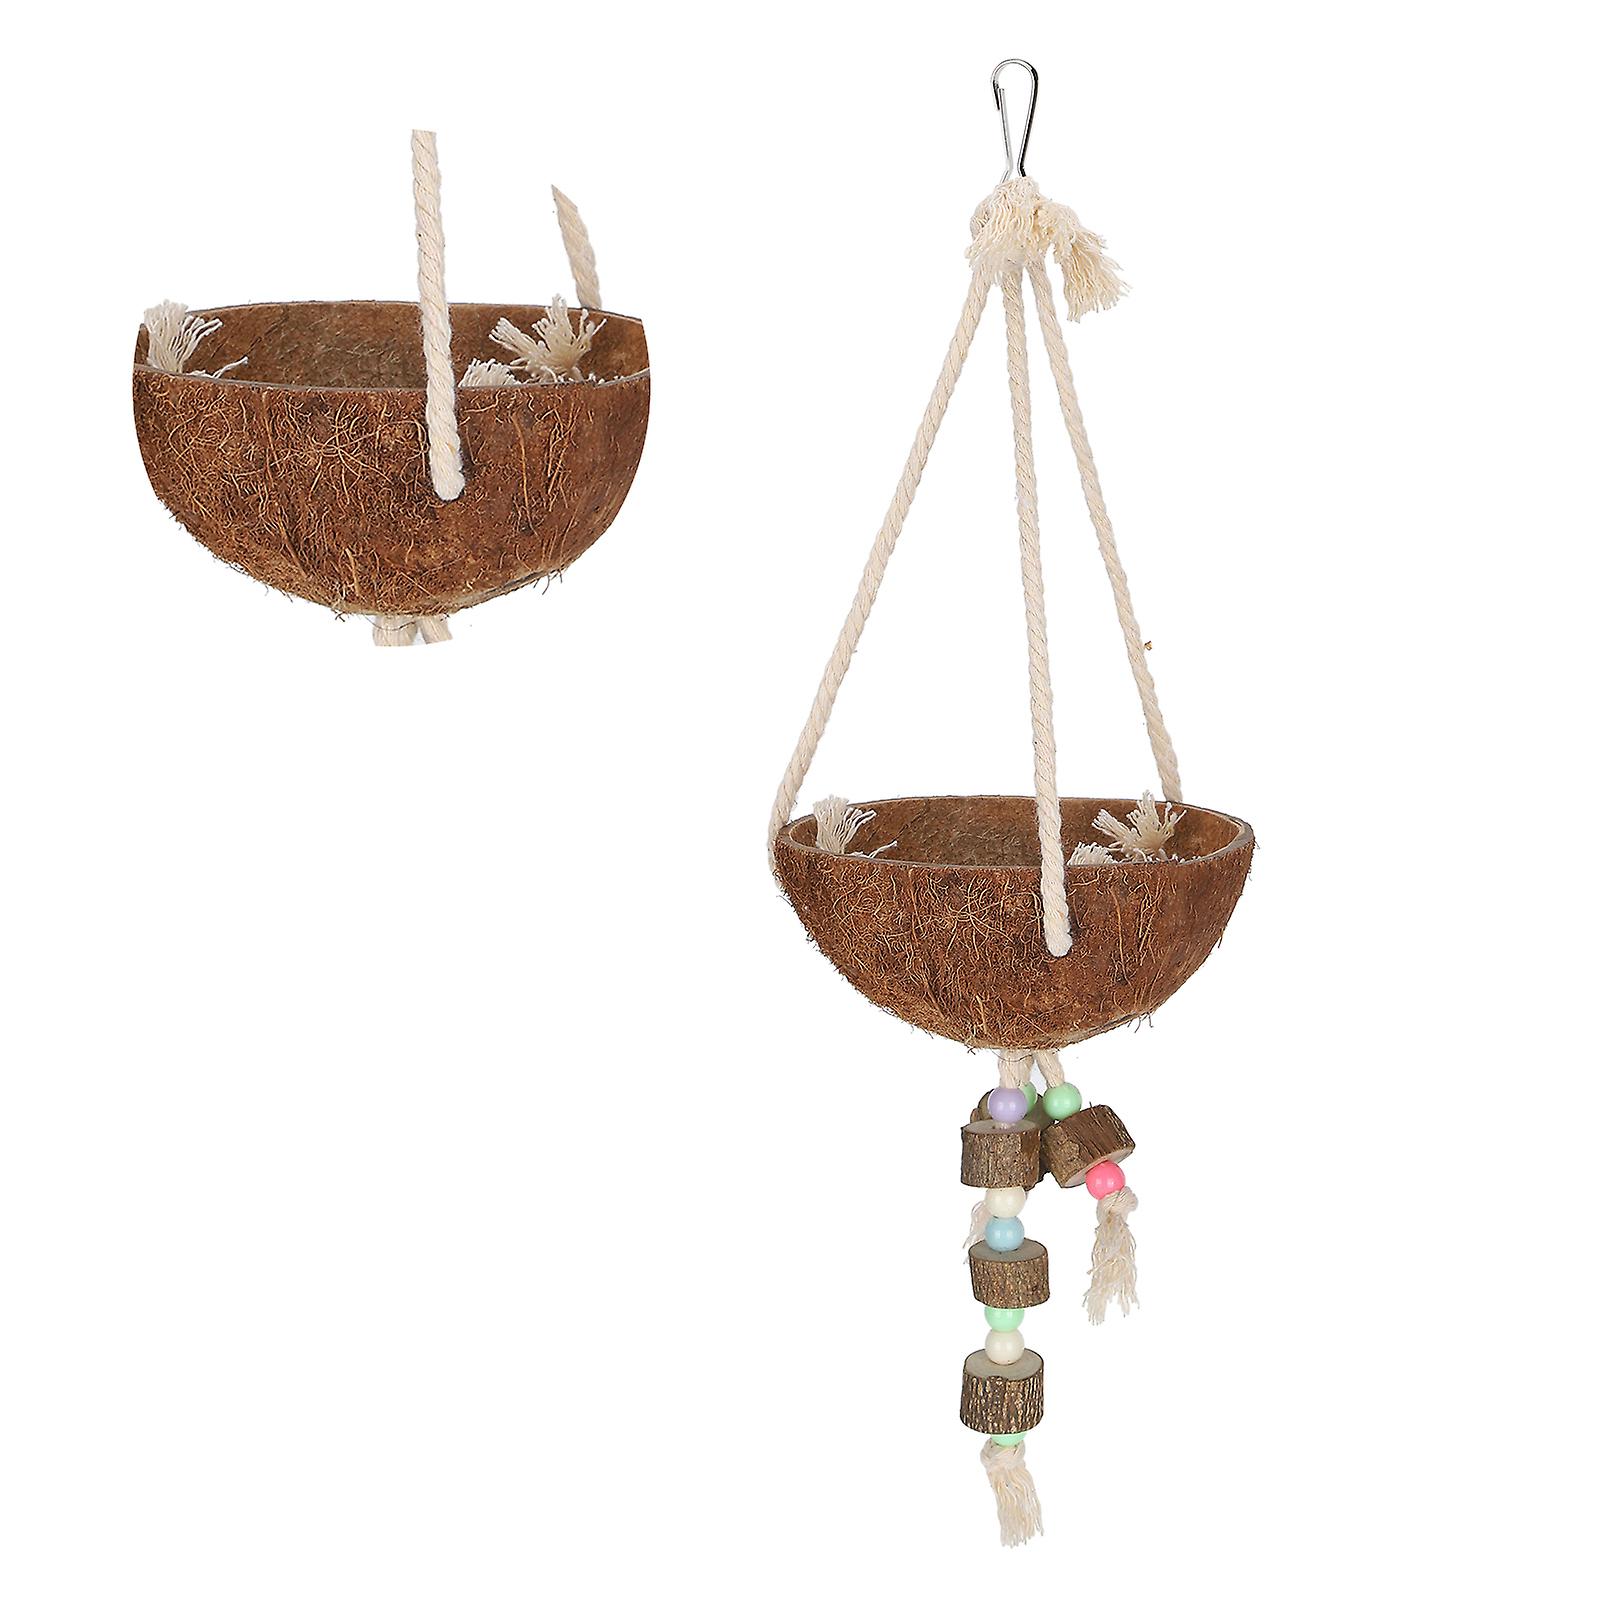 Nature Coconut Hanging Cage Bird Nest Shell Swing Parrot Biting Toy Pet Supplies